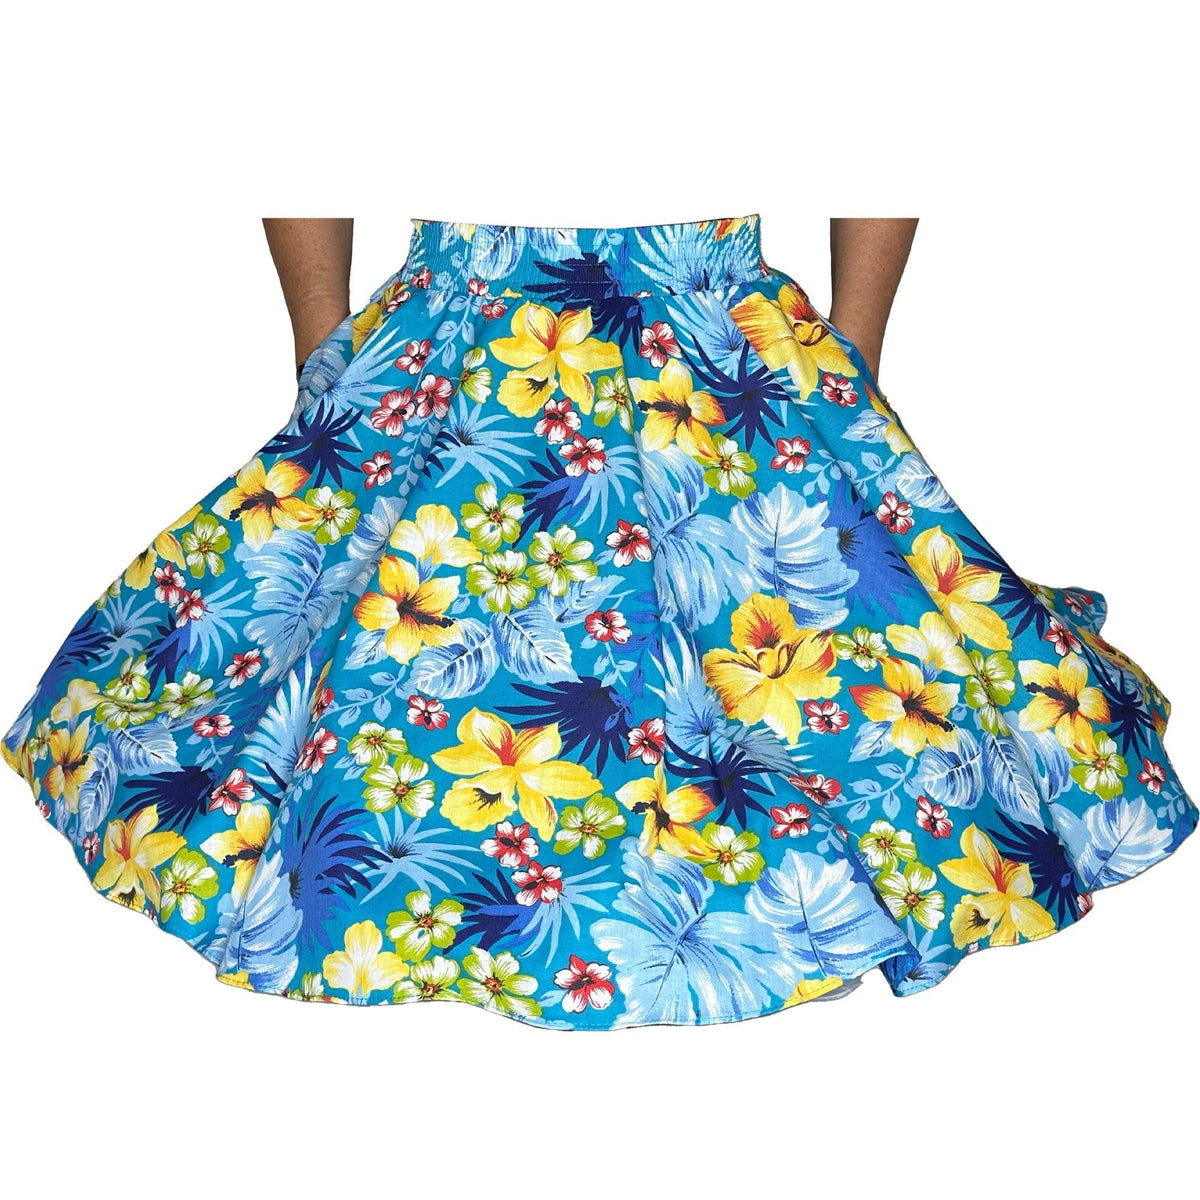 A woman wearing a Tropical Hawaiian Square Dance Skirt with hibiscus flowers by Square Up Fashions.